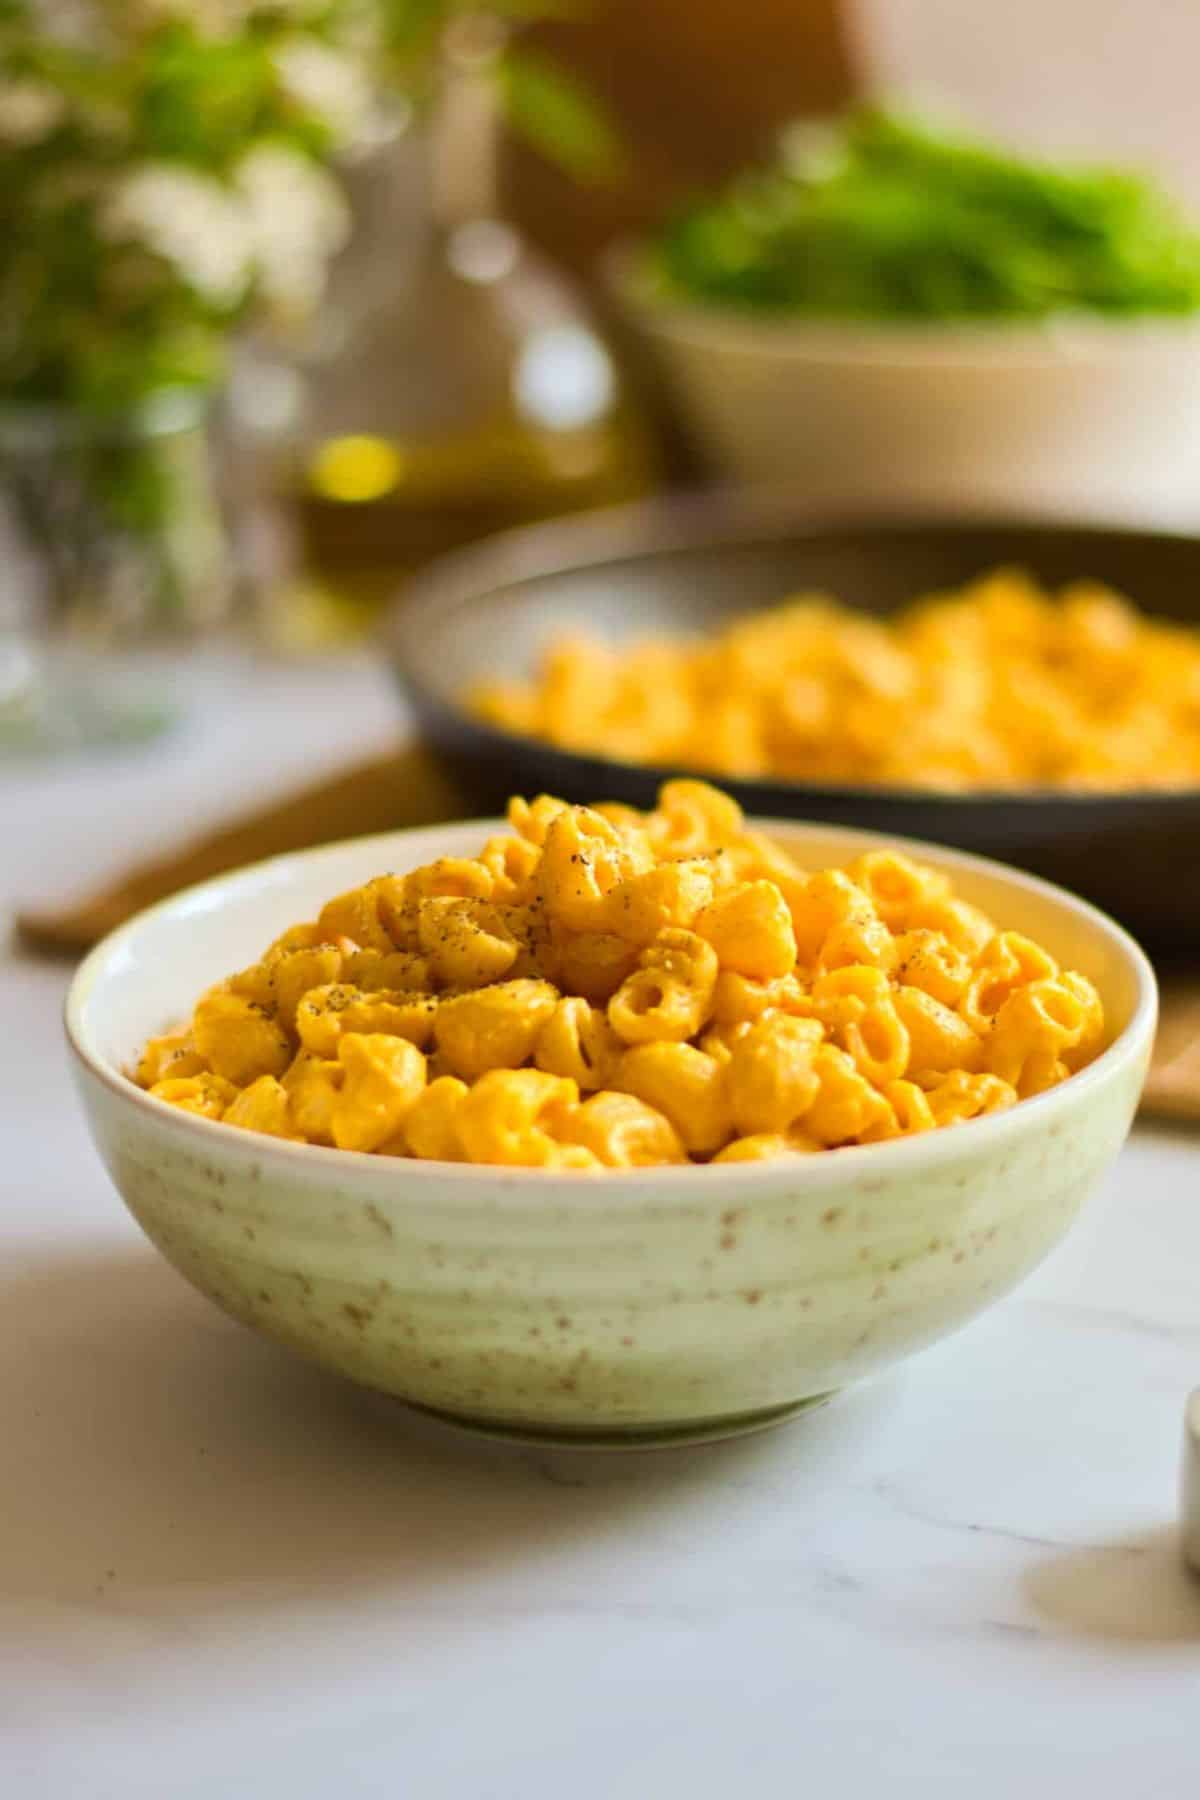 Delicious Gluten-Free Vegan Mac And Cheese in a gray bowl.